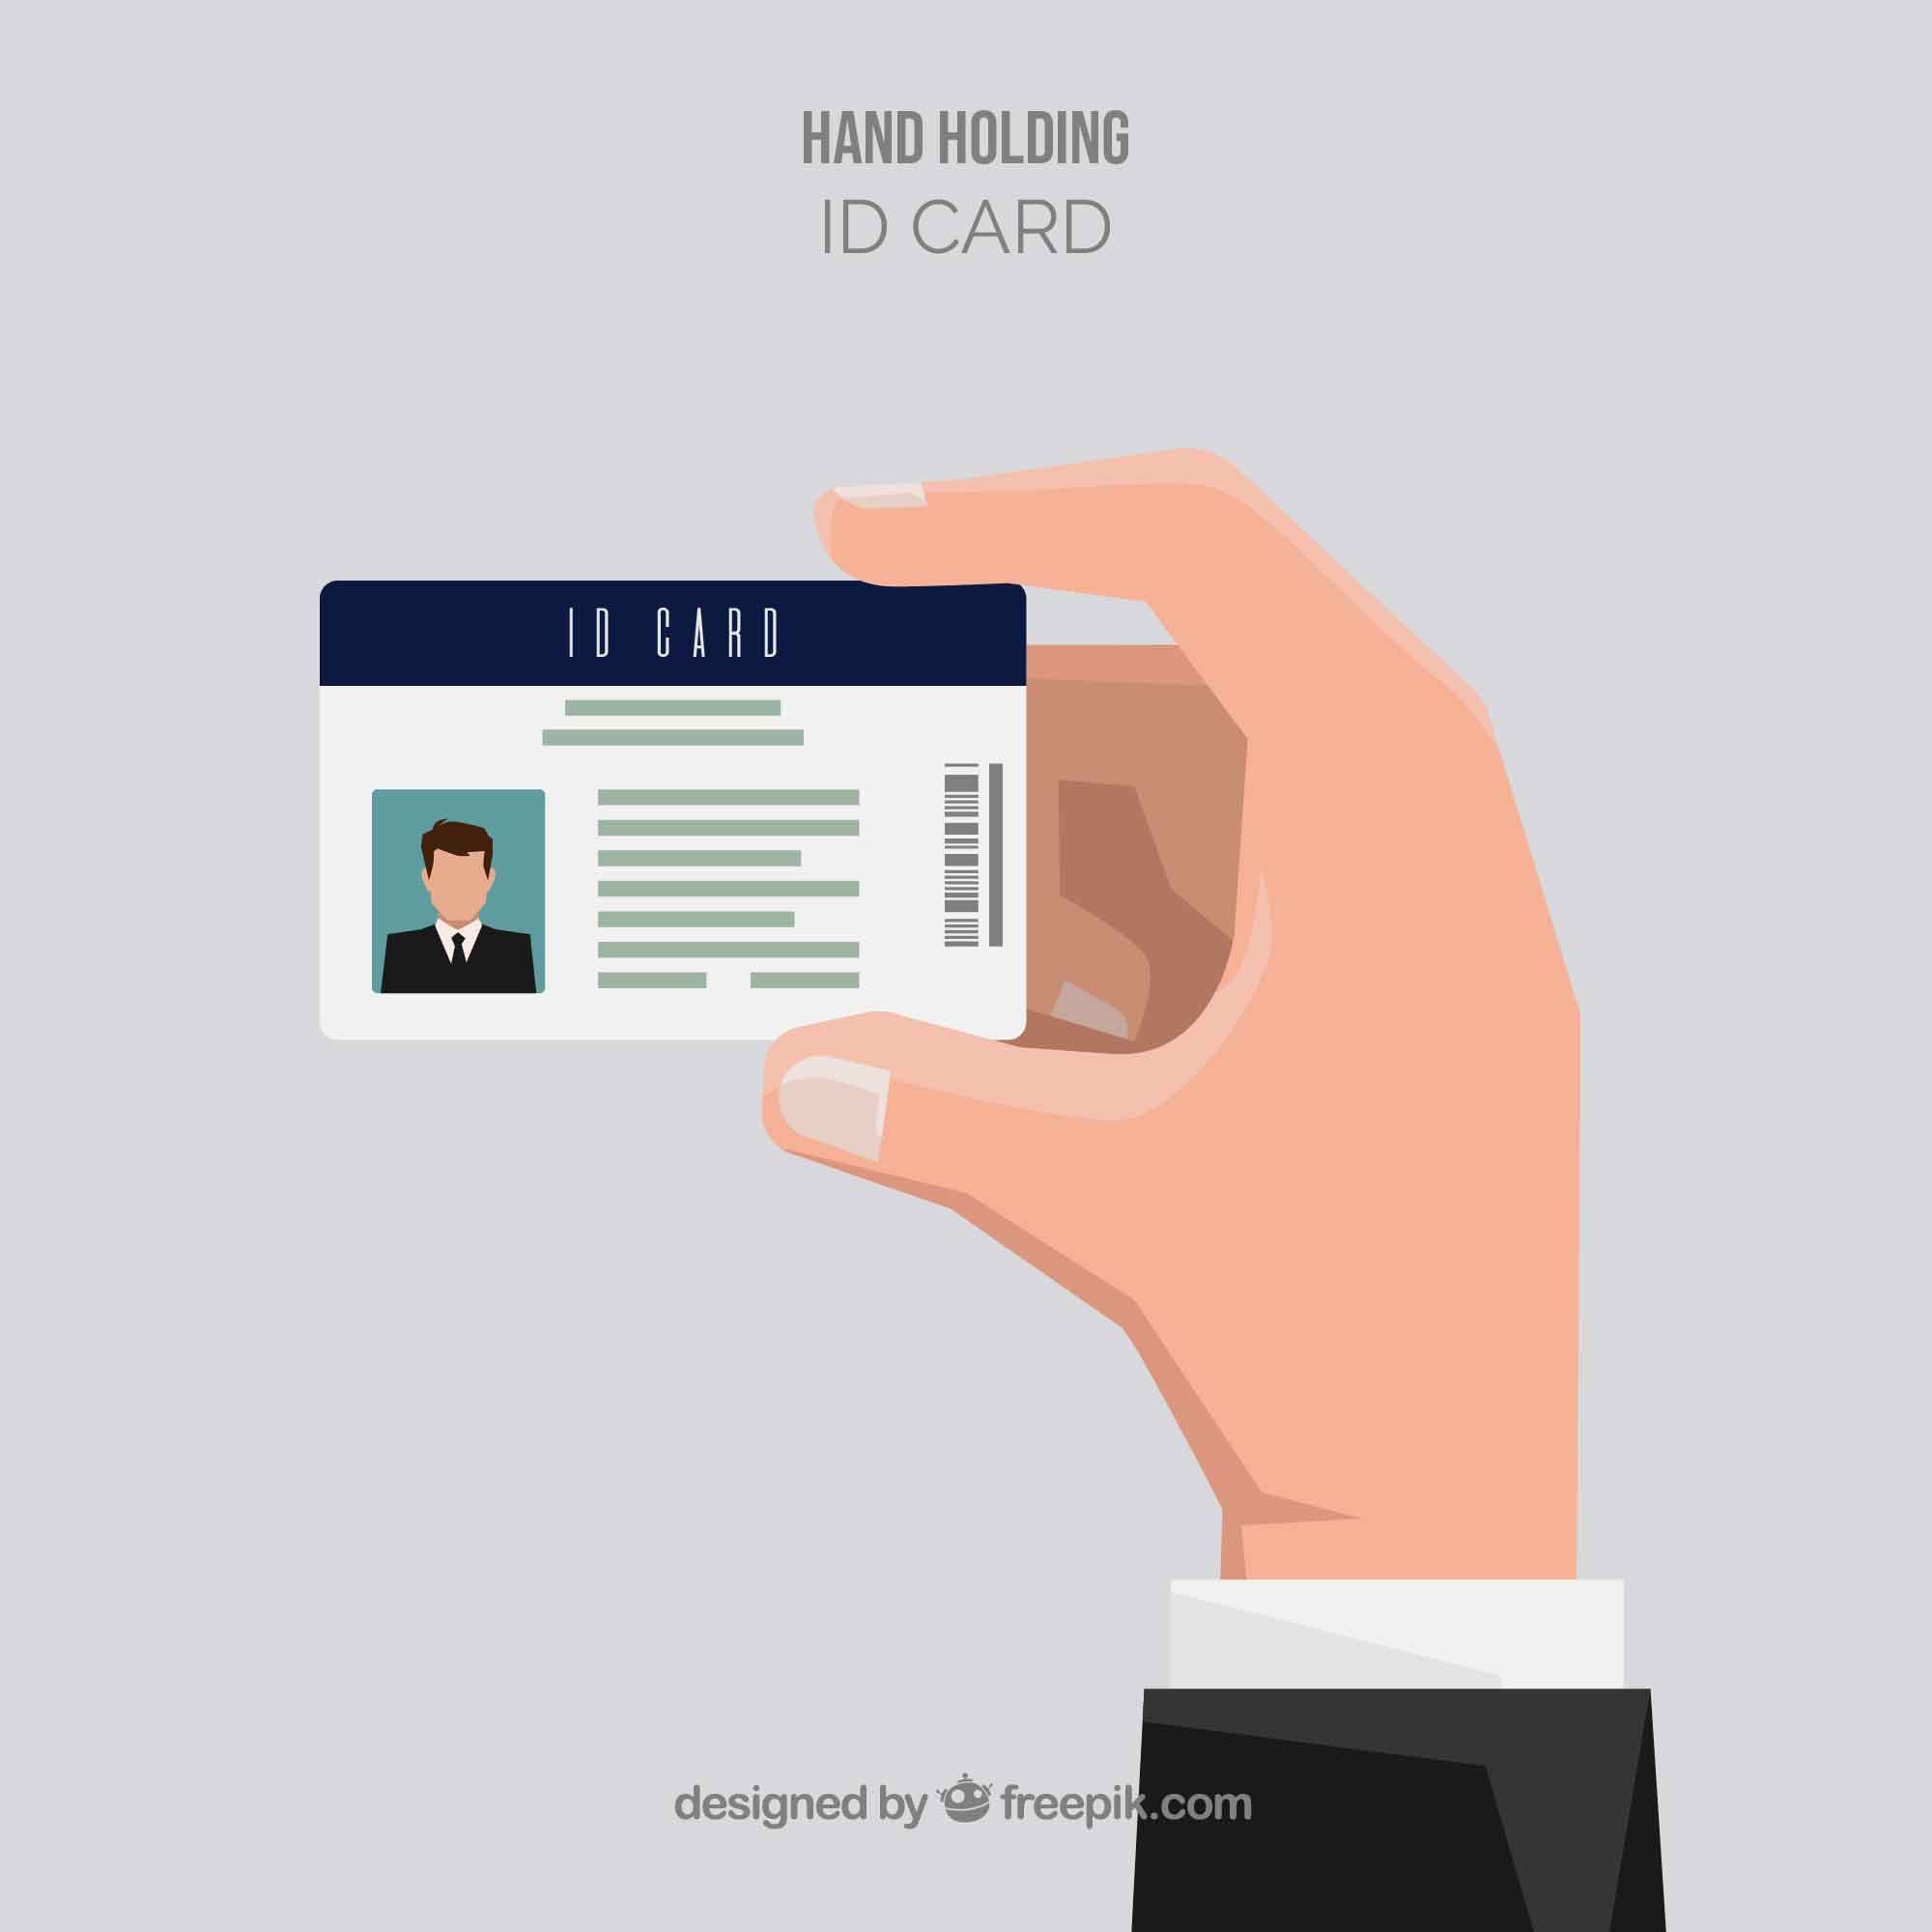 A hand is holding an ID card against a light gray background. The ID card features a photo of a person in a suit and tie on the left side, with text information and a barcode on the right. The top of the card has a dark blue band with the words "ID CARD" written on it. The illustration is simple and clean, emphasizing the act of holding the identification card.